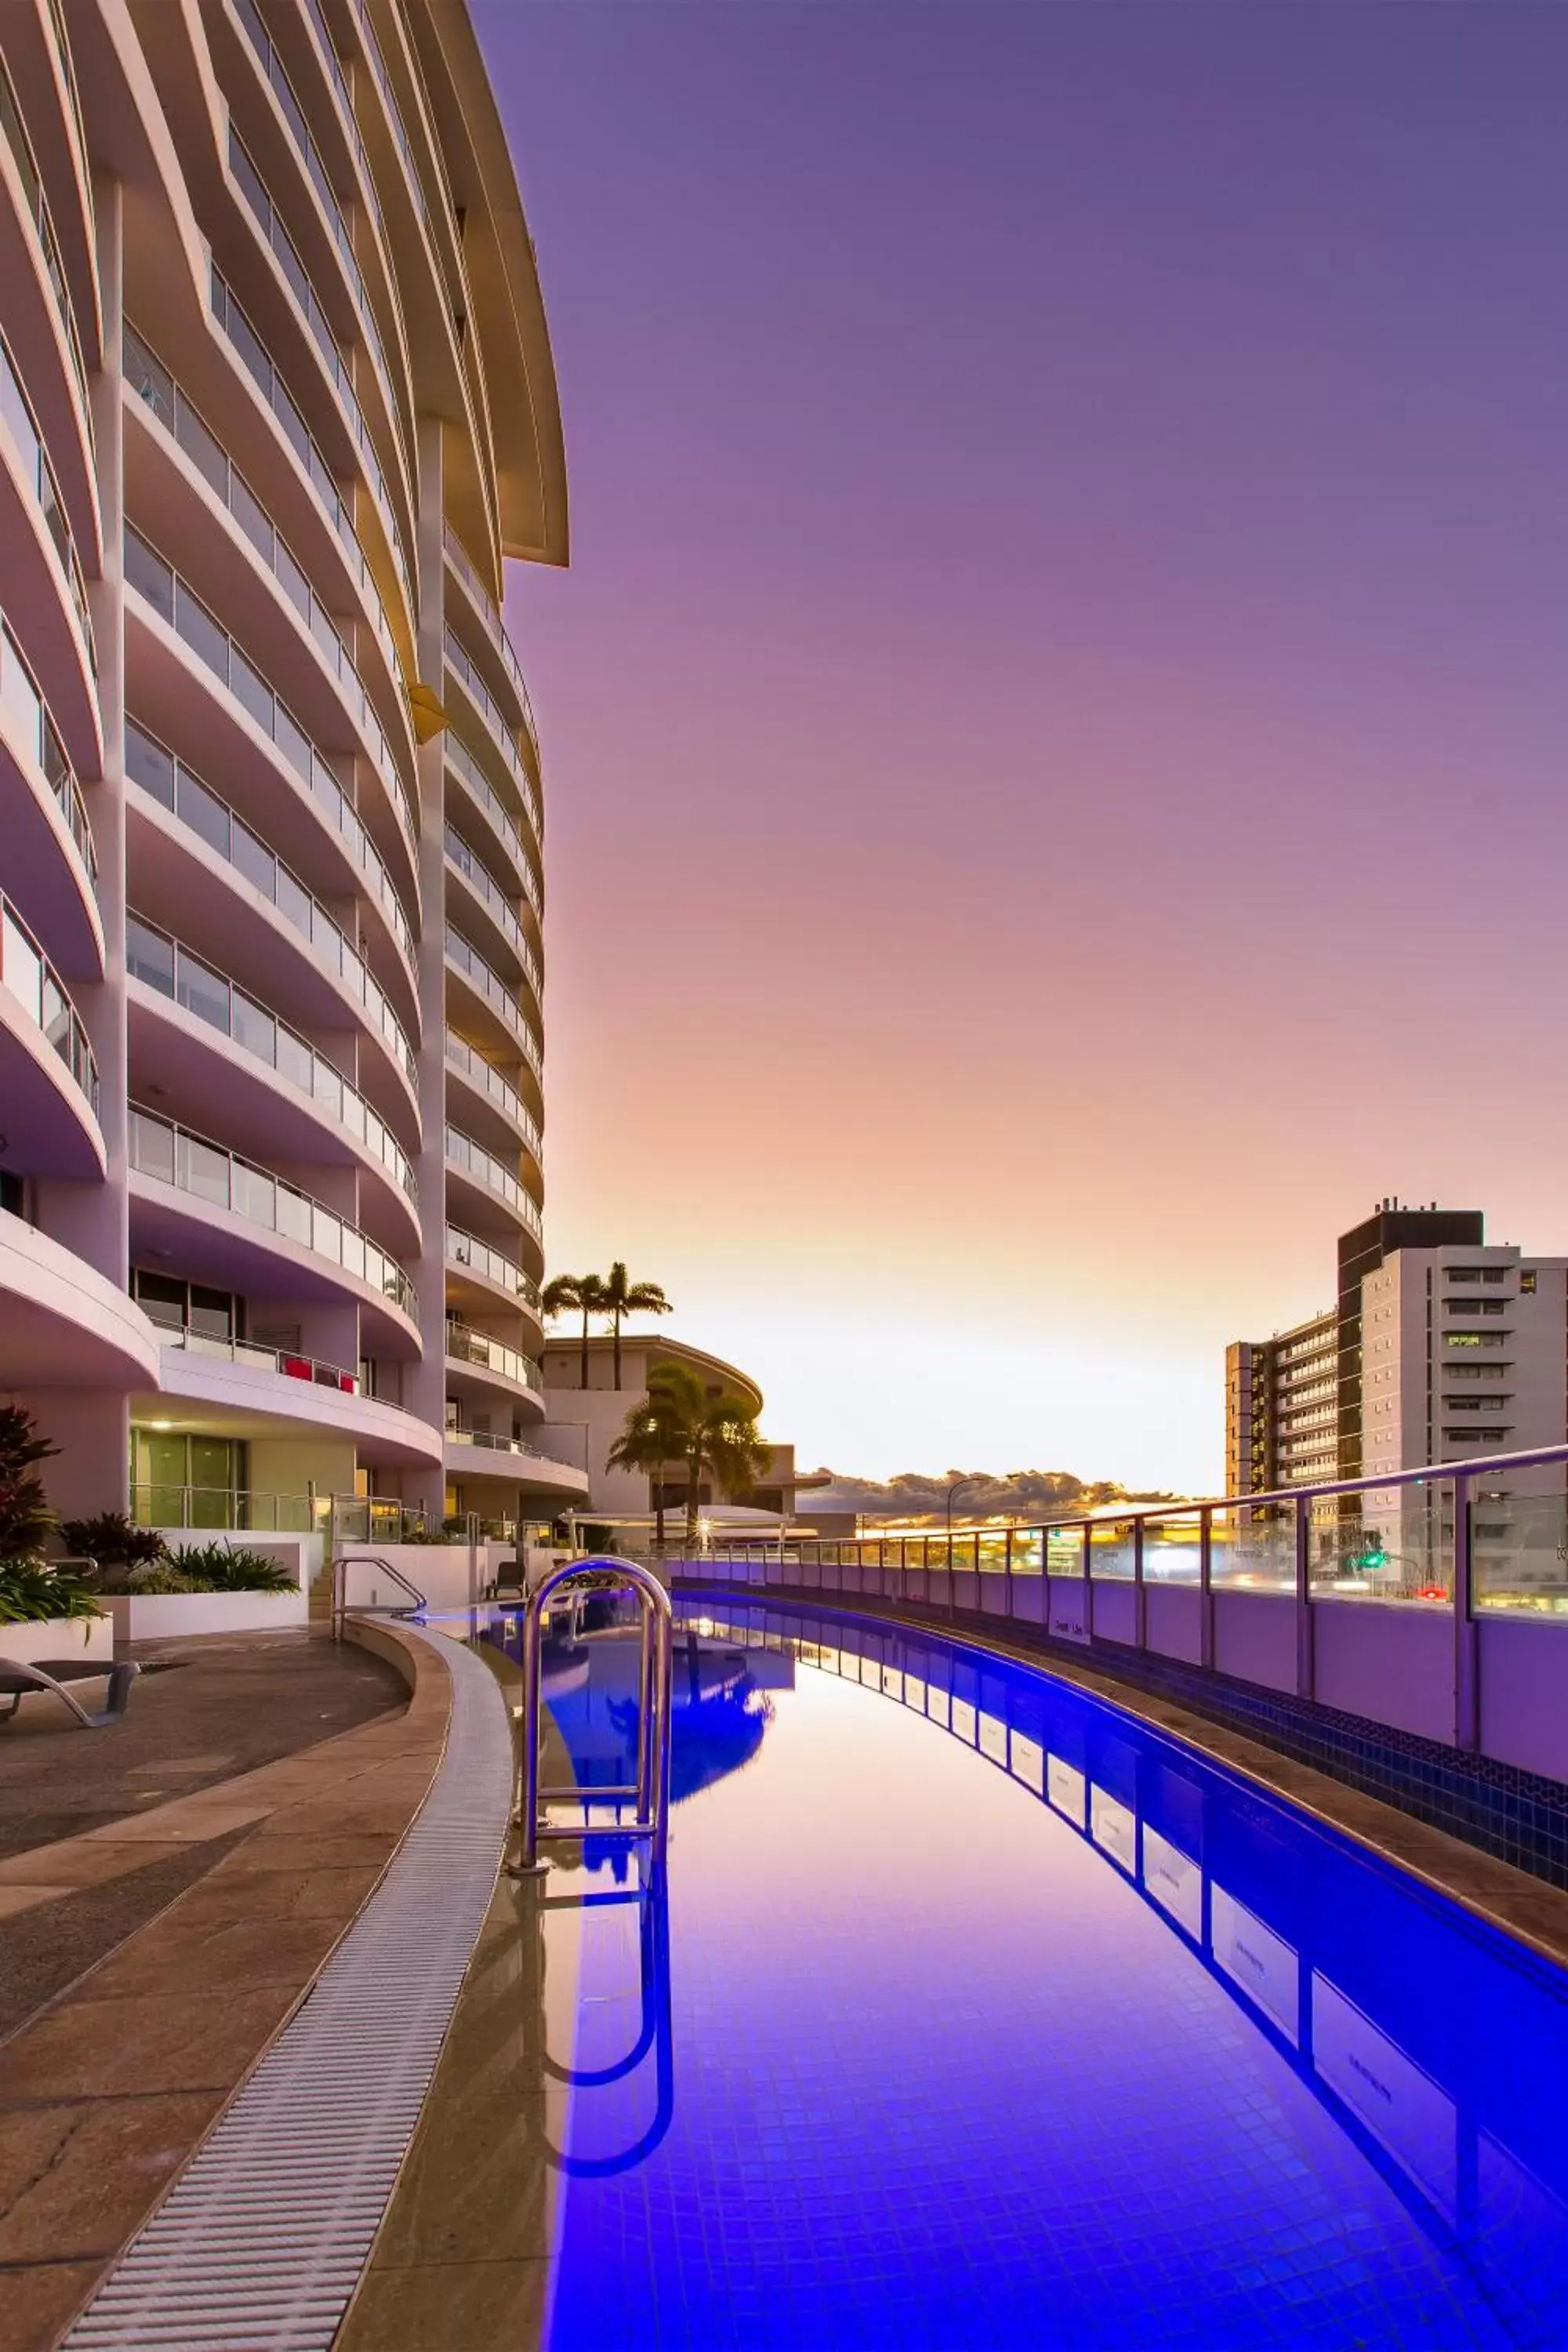 Property building, Swimming Pool in The Sebel Maroochydore